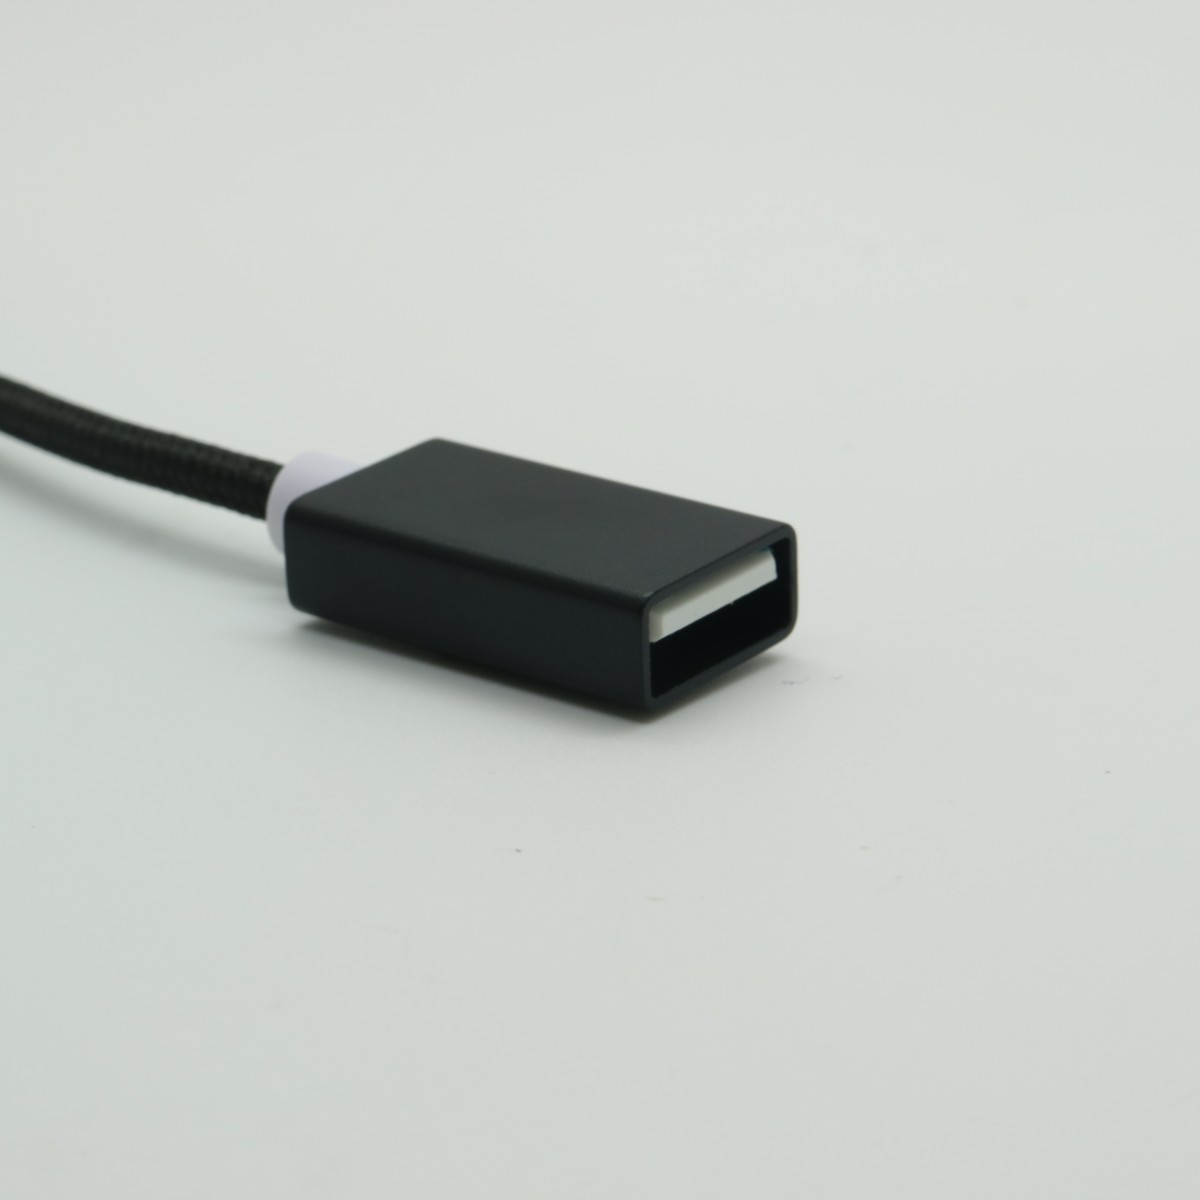 VOXLINK usb male female cable USB 2.0 M/F Male To Female Cable Extension Wire High Quality M-F Super High Speed black 1m